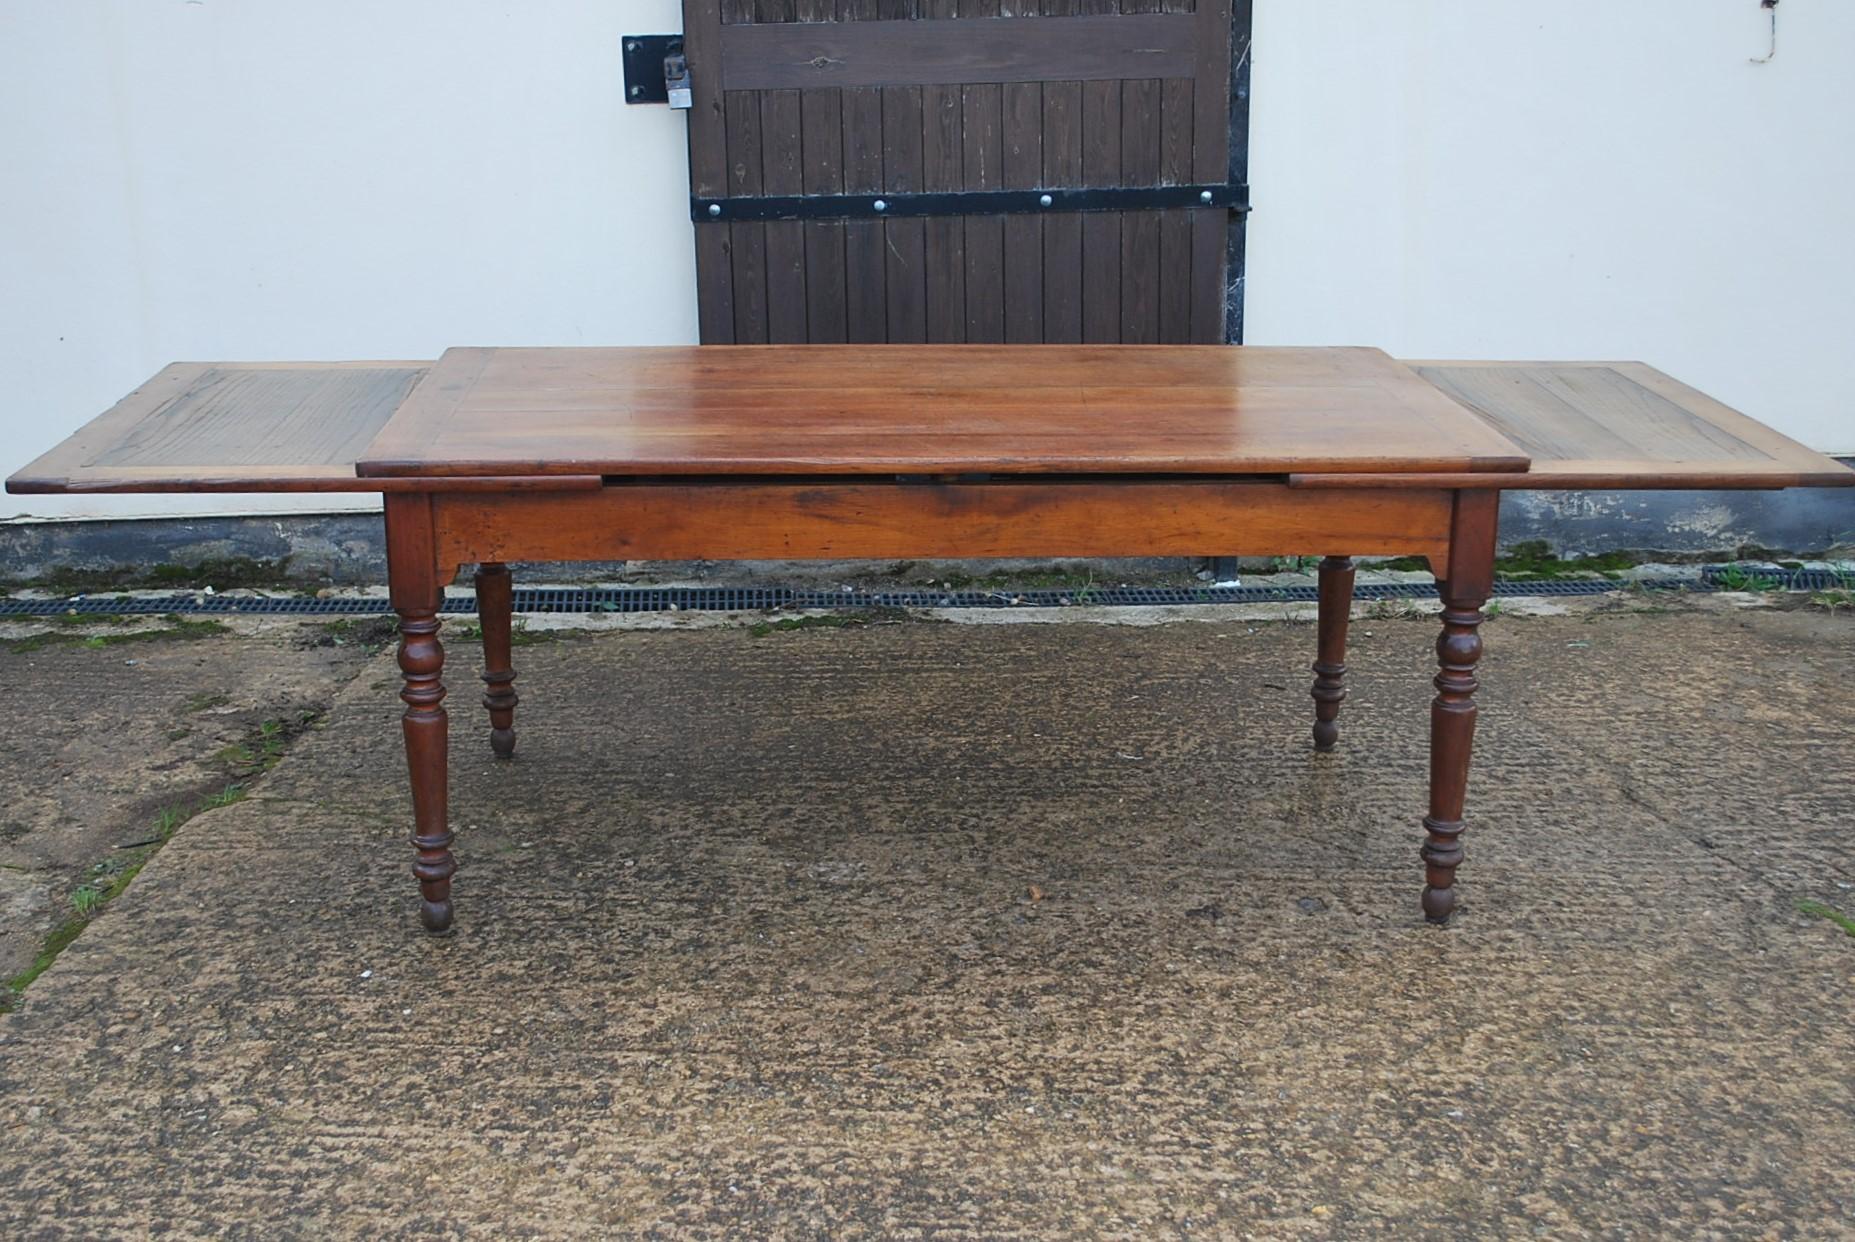 Hutton-Clarke Antiques is delighted to present an exquisite French extending farmhouse table, dating back to around 1860. This charming piece boasts a timeless design, with turned legs and the added convenience of drawers at either end. The table